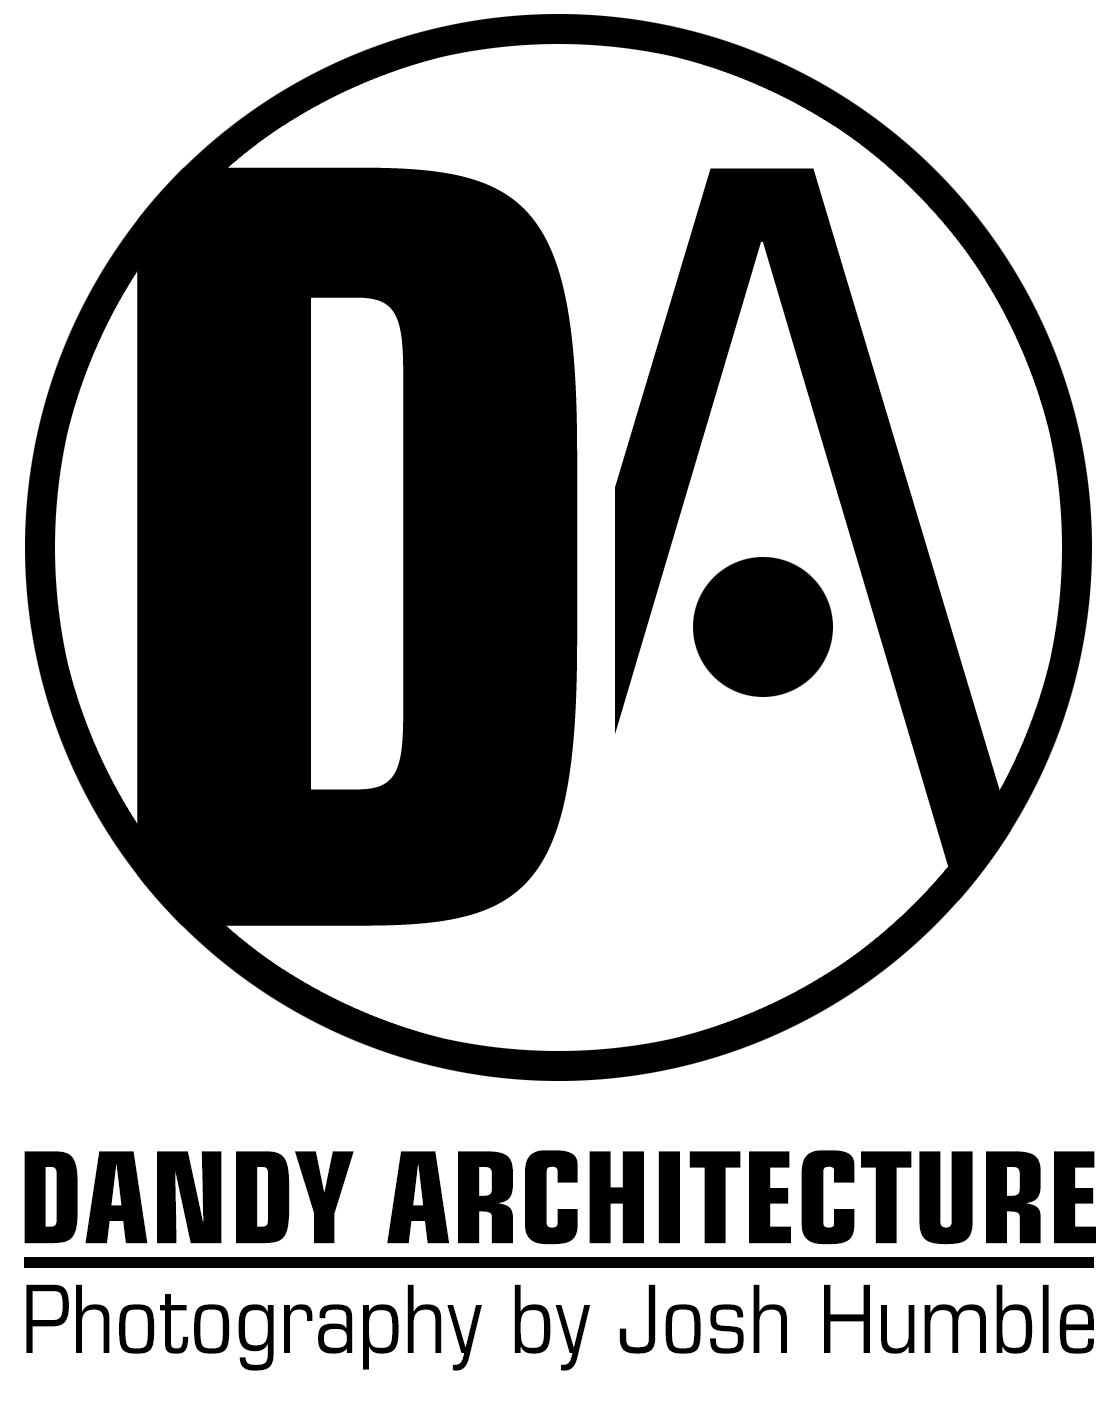 Dandy Architecture Photography by Josh Humble